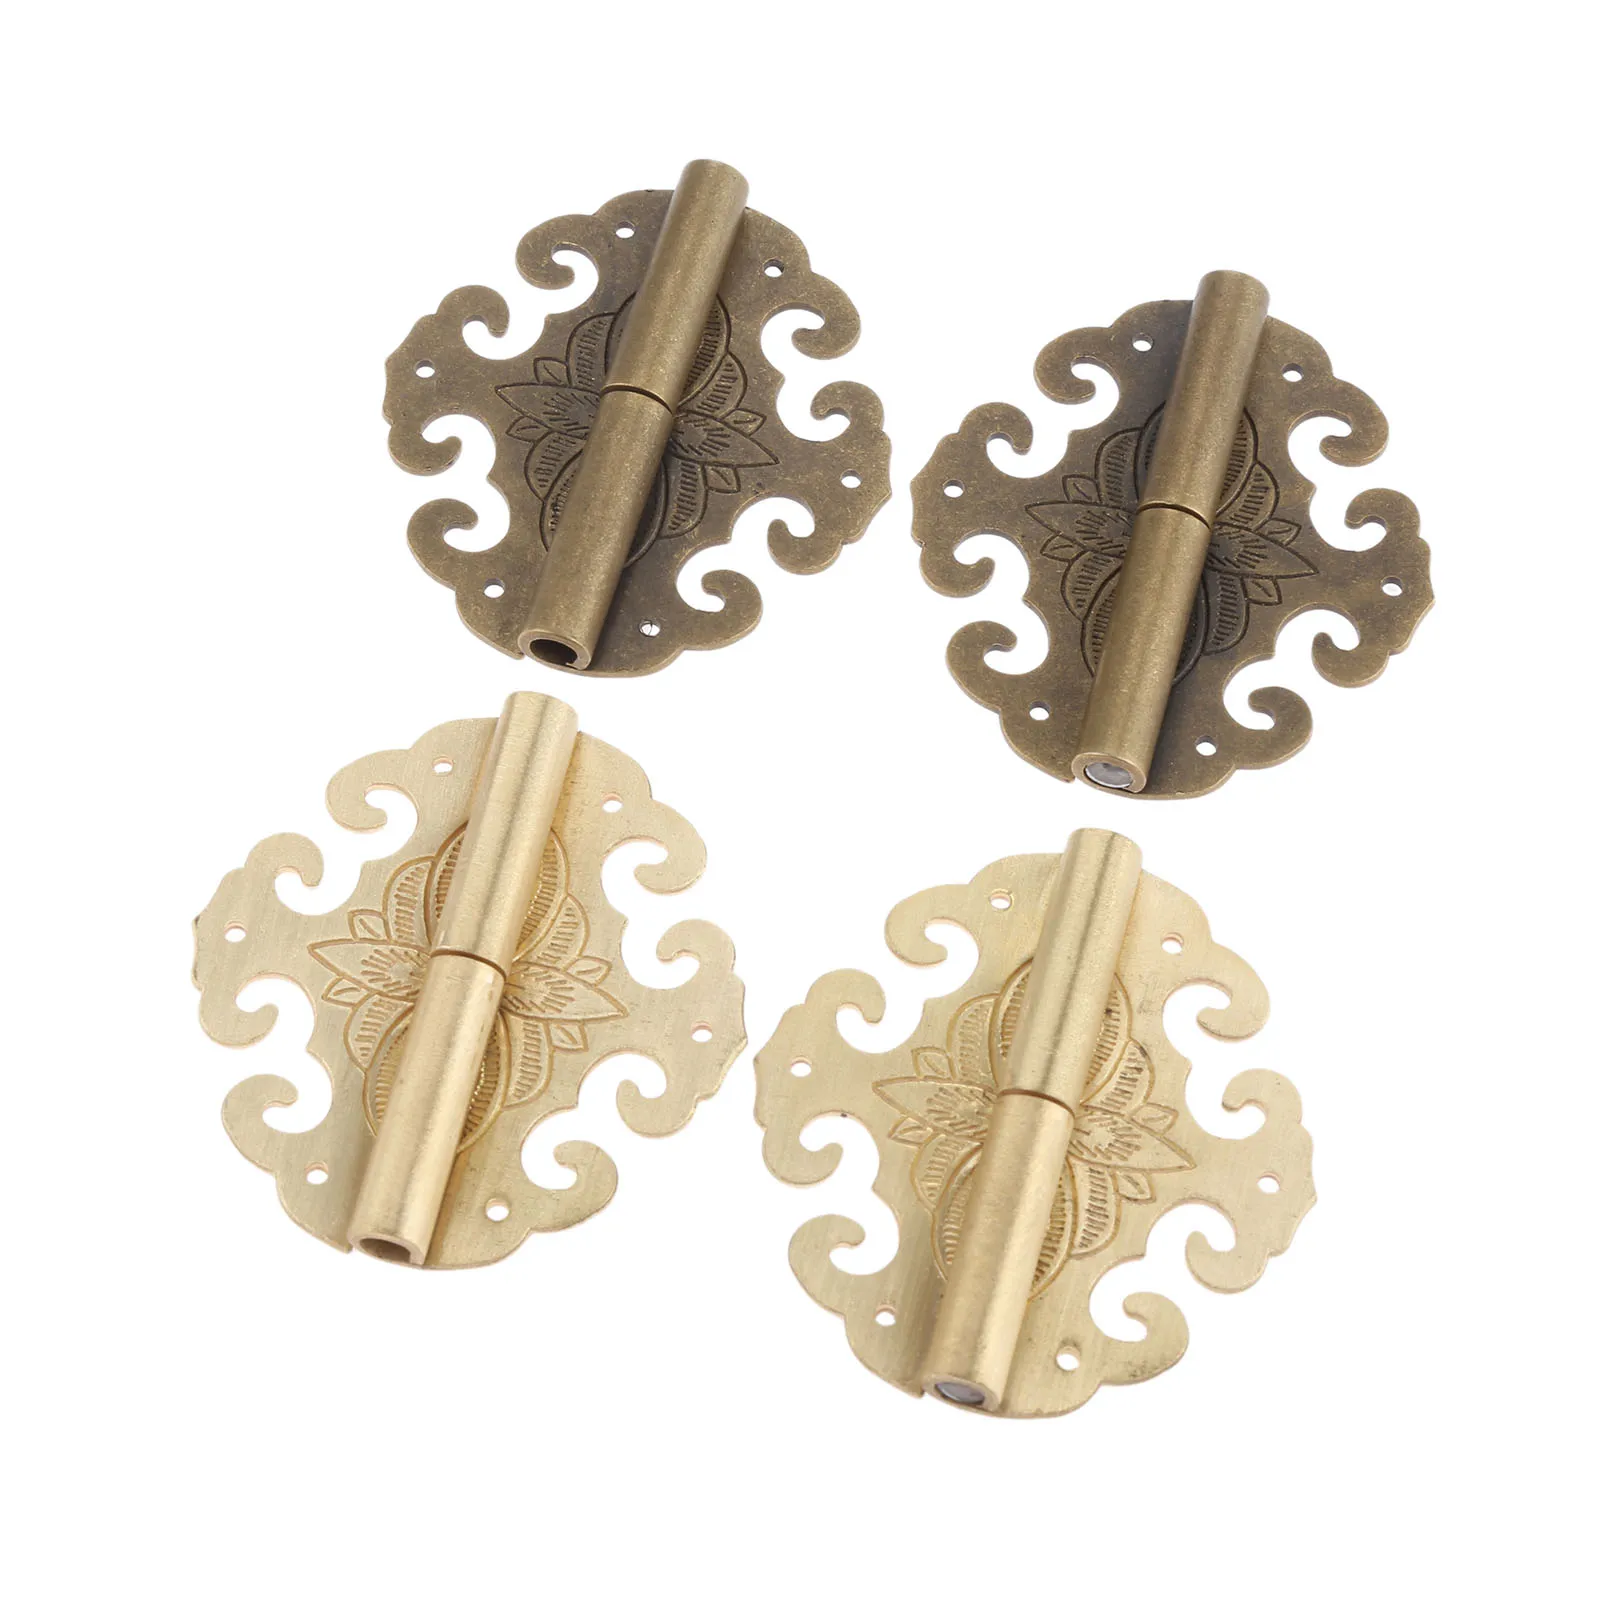 1Pc Brass Bat Flower Hinge Decor Cloud Hinges Wooden Gift Jewelry Box Hinge Fittings For Furniture Hardware 12Pcs Screw 60*55mm